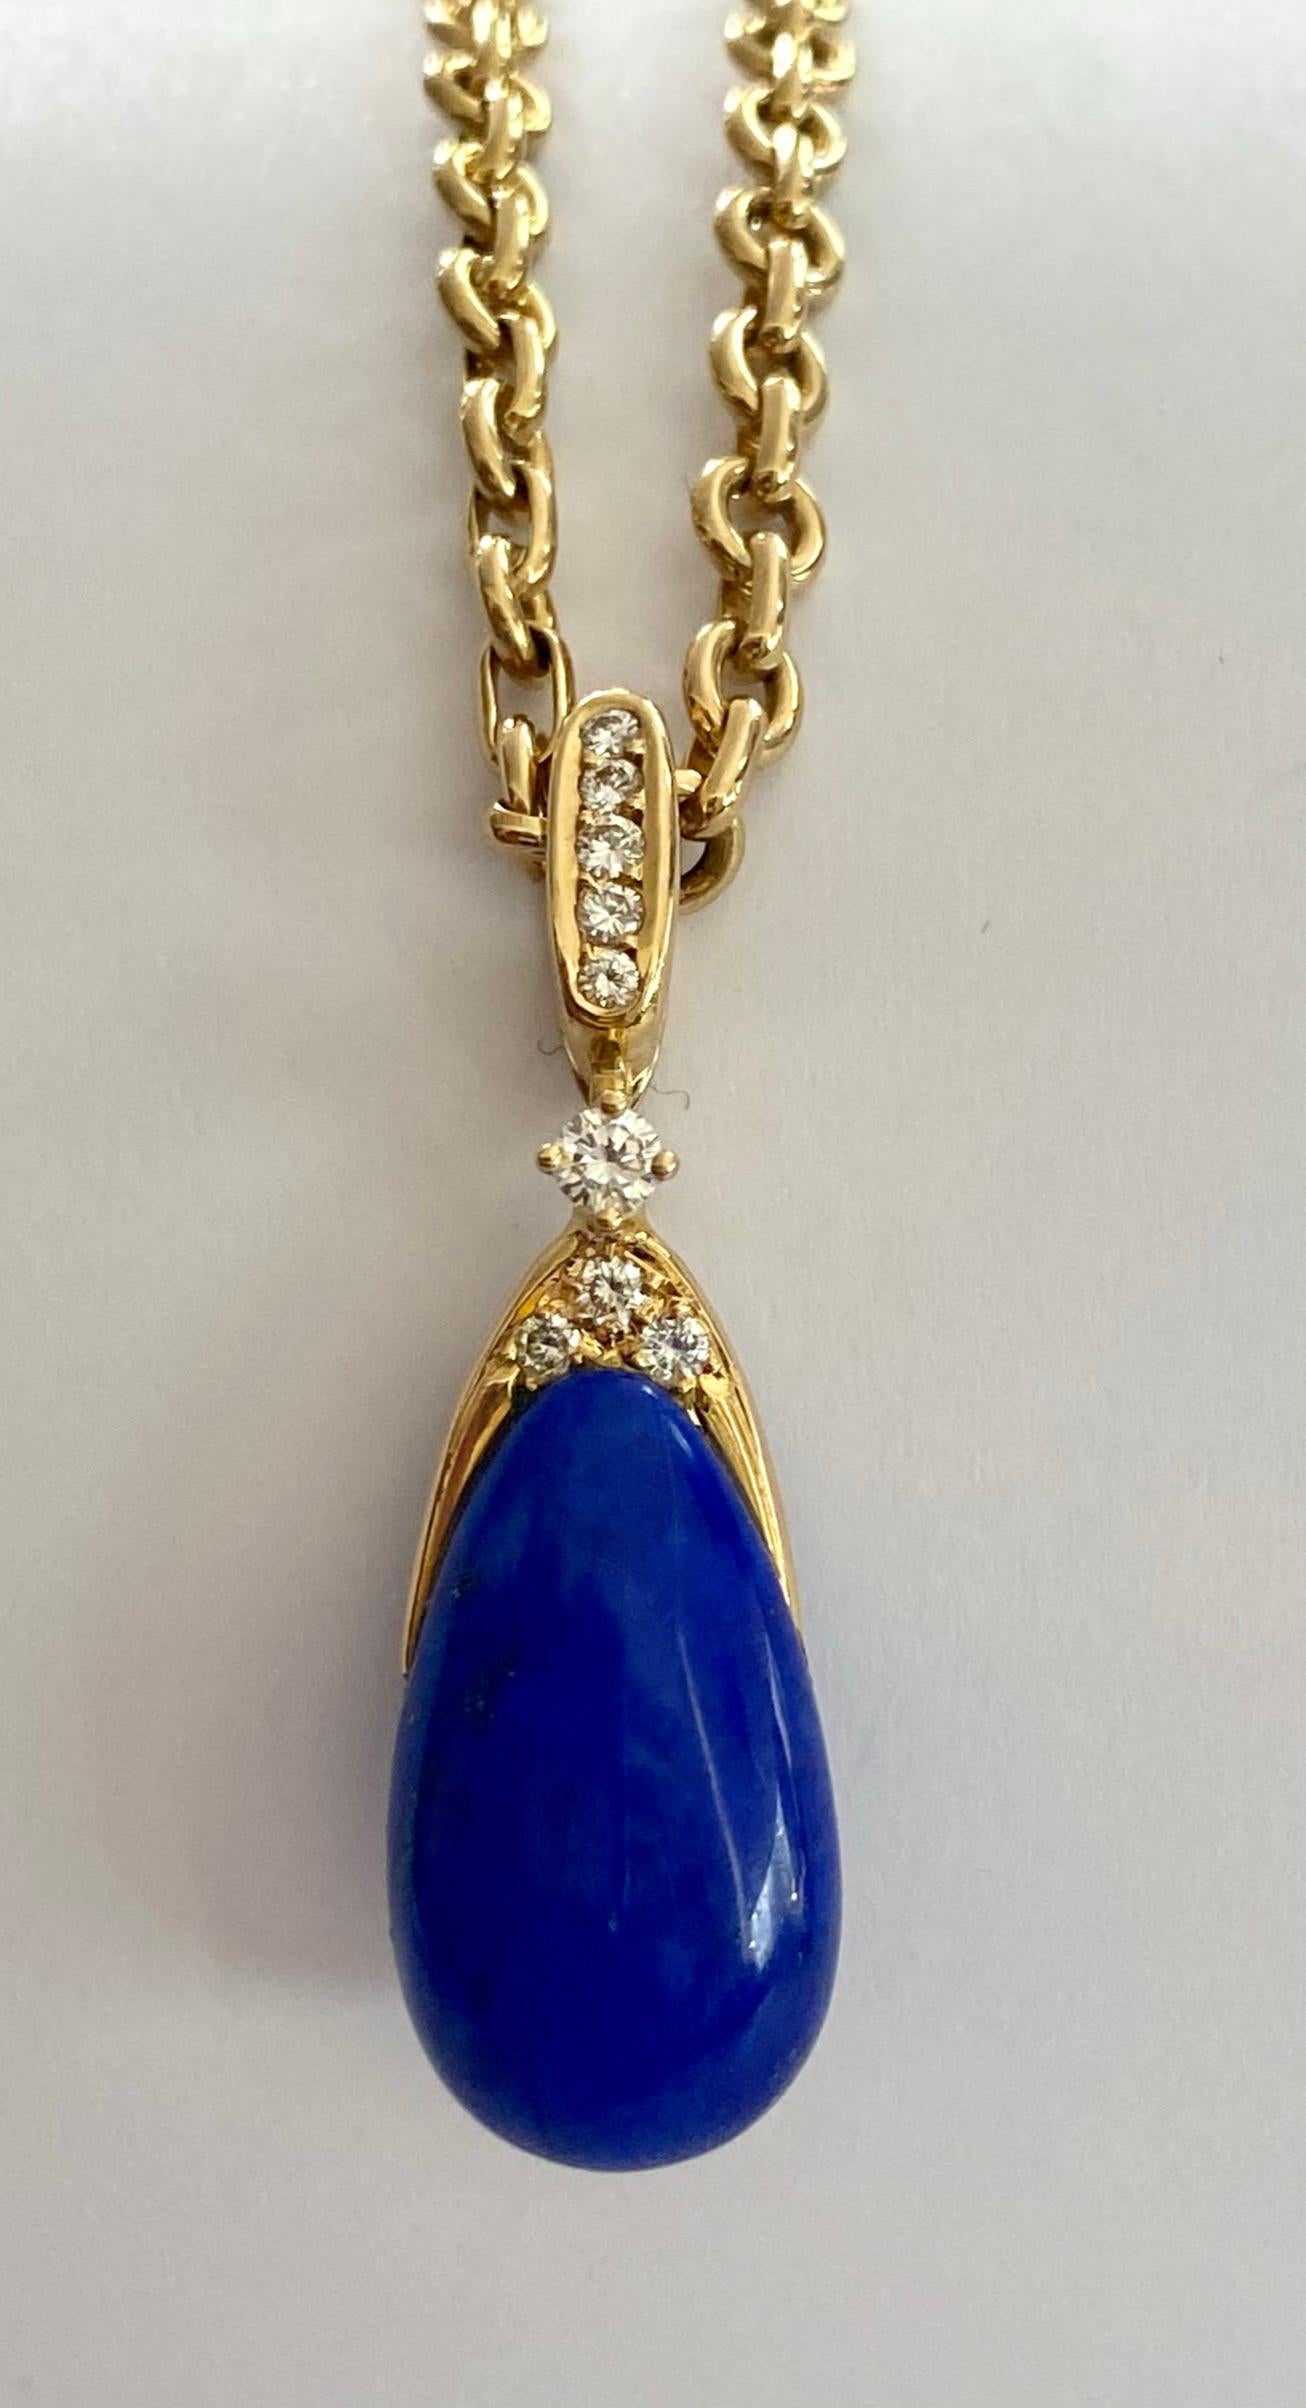 One 18 Karta yellow gold Pendant and Chain, stamped: 750 & Chaumet Paris 
Pendant has one 12.00 carat drop, cabuchon natural Lapis Lazuli (not treated) and 9 brillant cut diamonds weihgting: 0.25 ct. VVS-VS  - F Color.
Chain = 44.5 cm ( 17.2 inch)